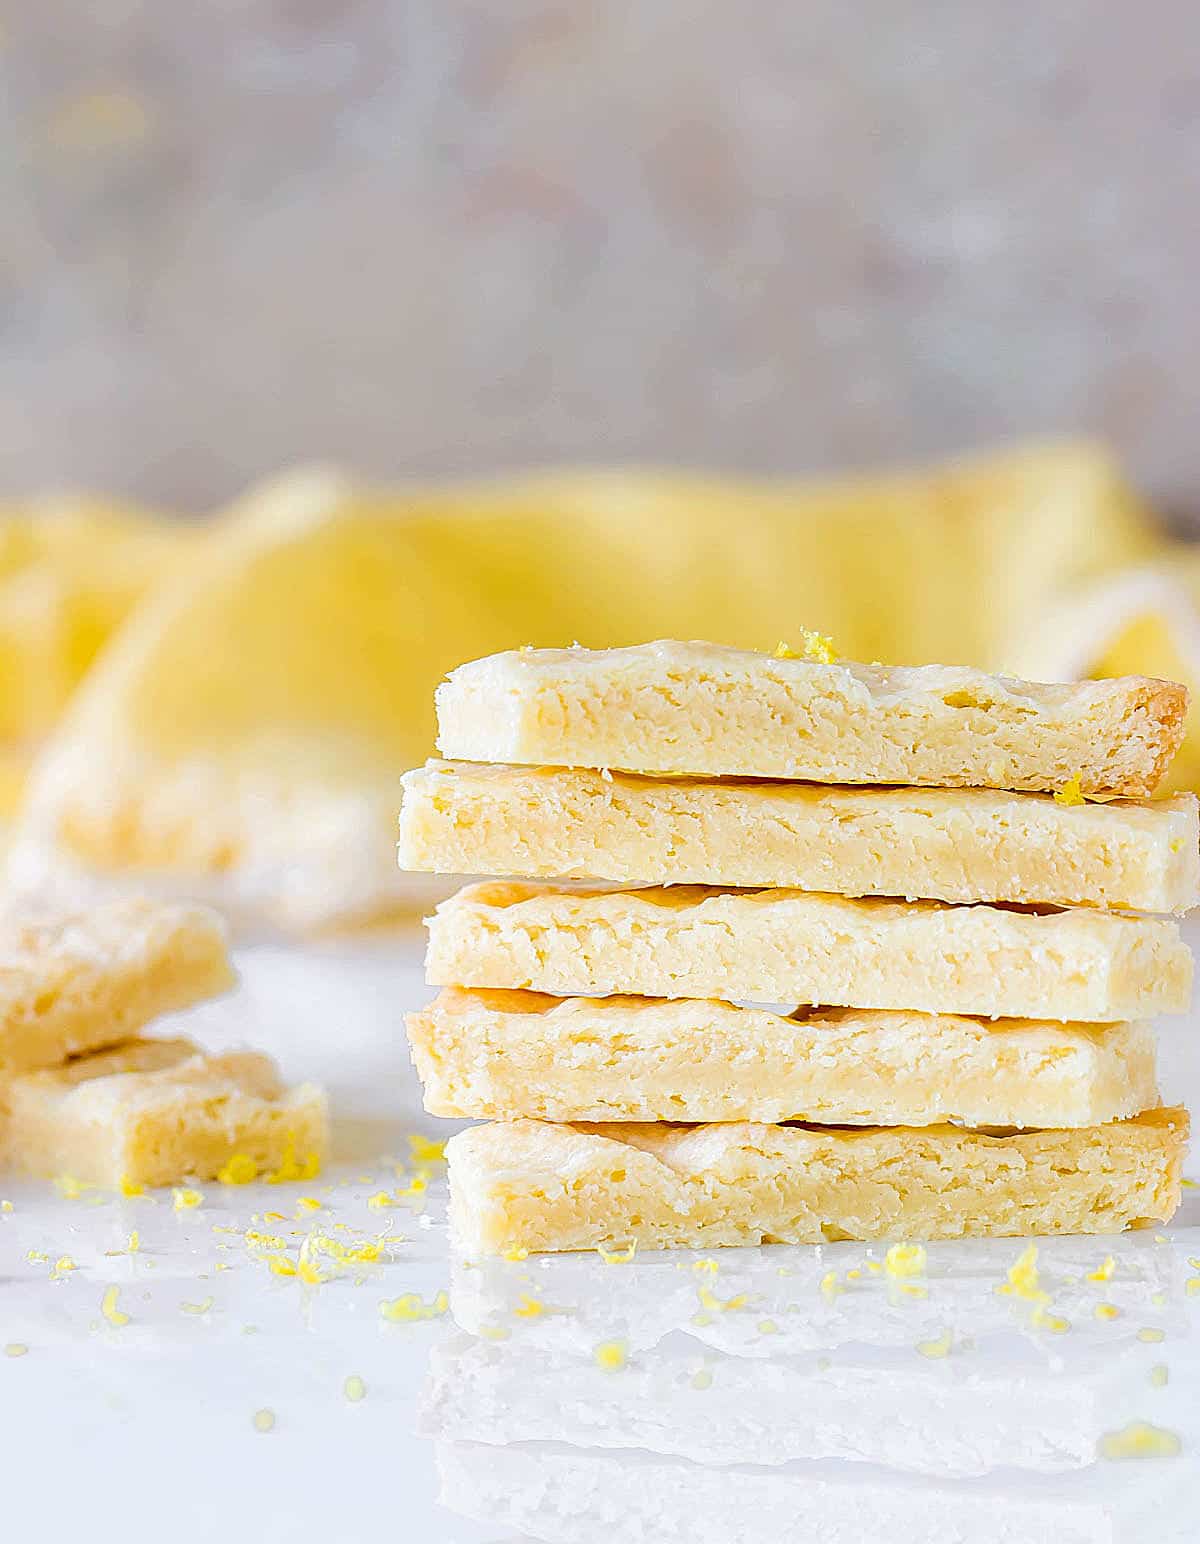 Grey and yellow background with stack of five shortbread fingers on a white surface.